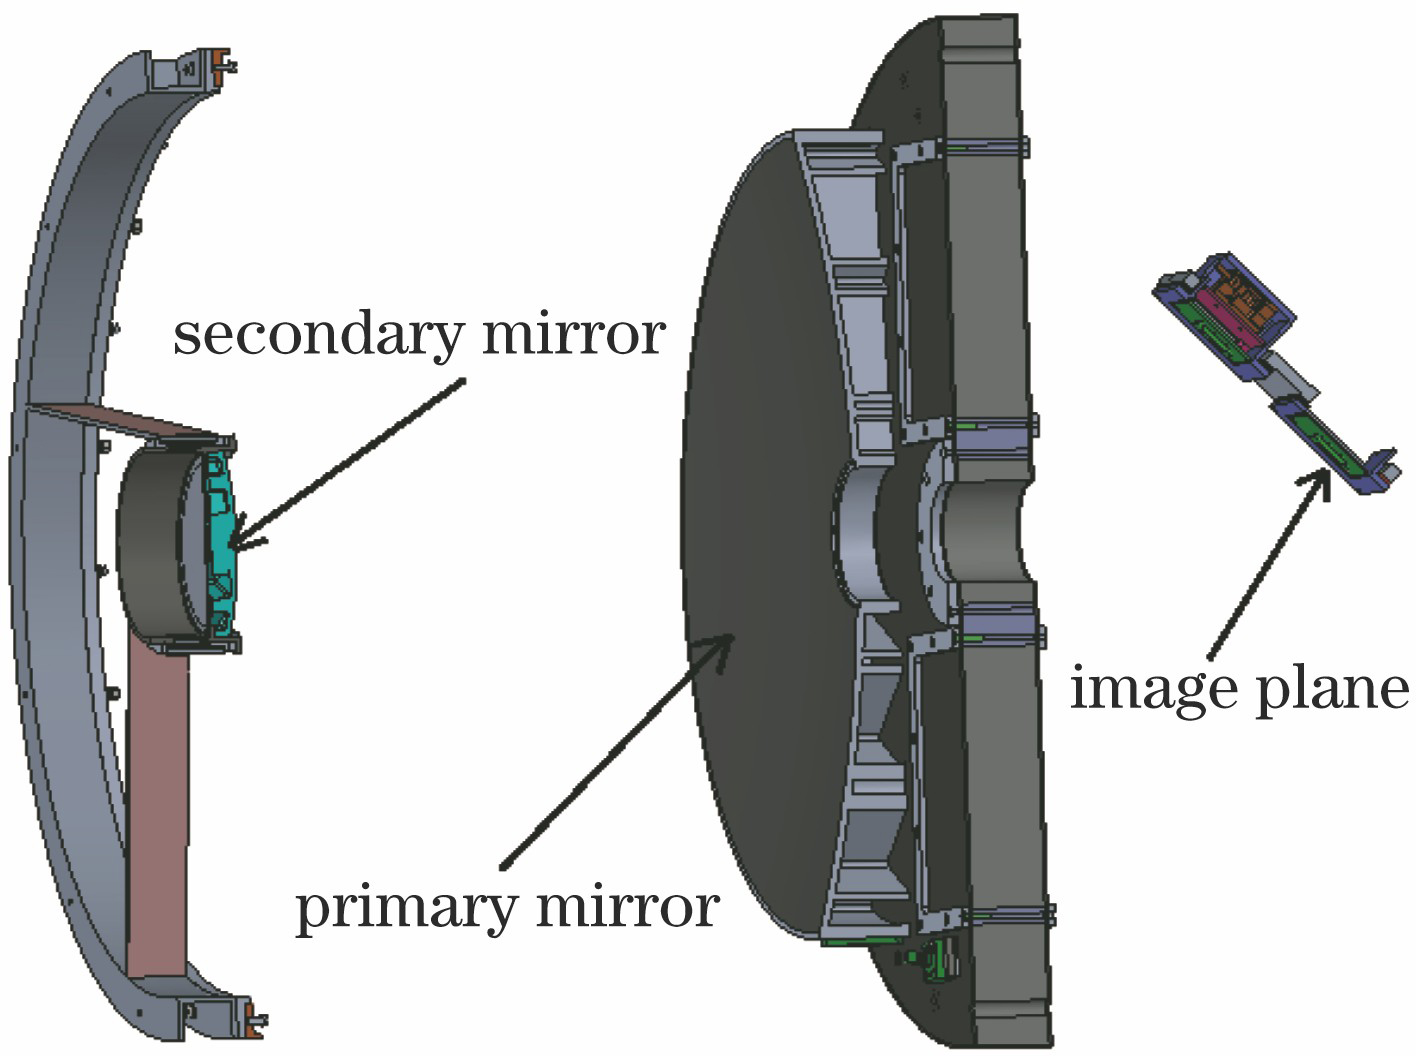 Structural diagram of imaging system